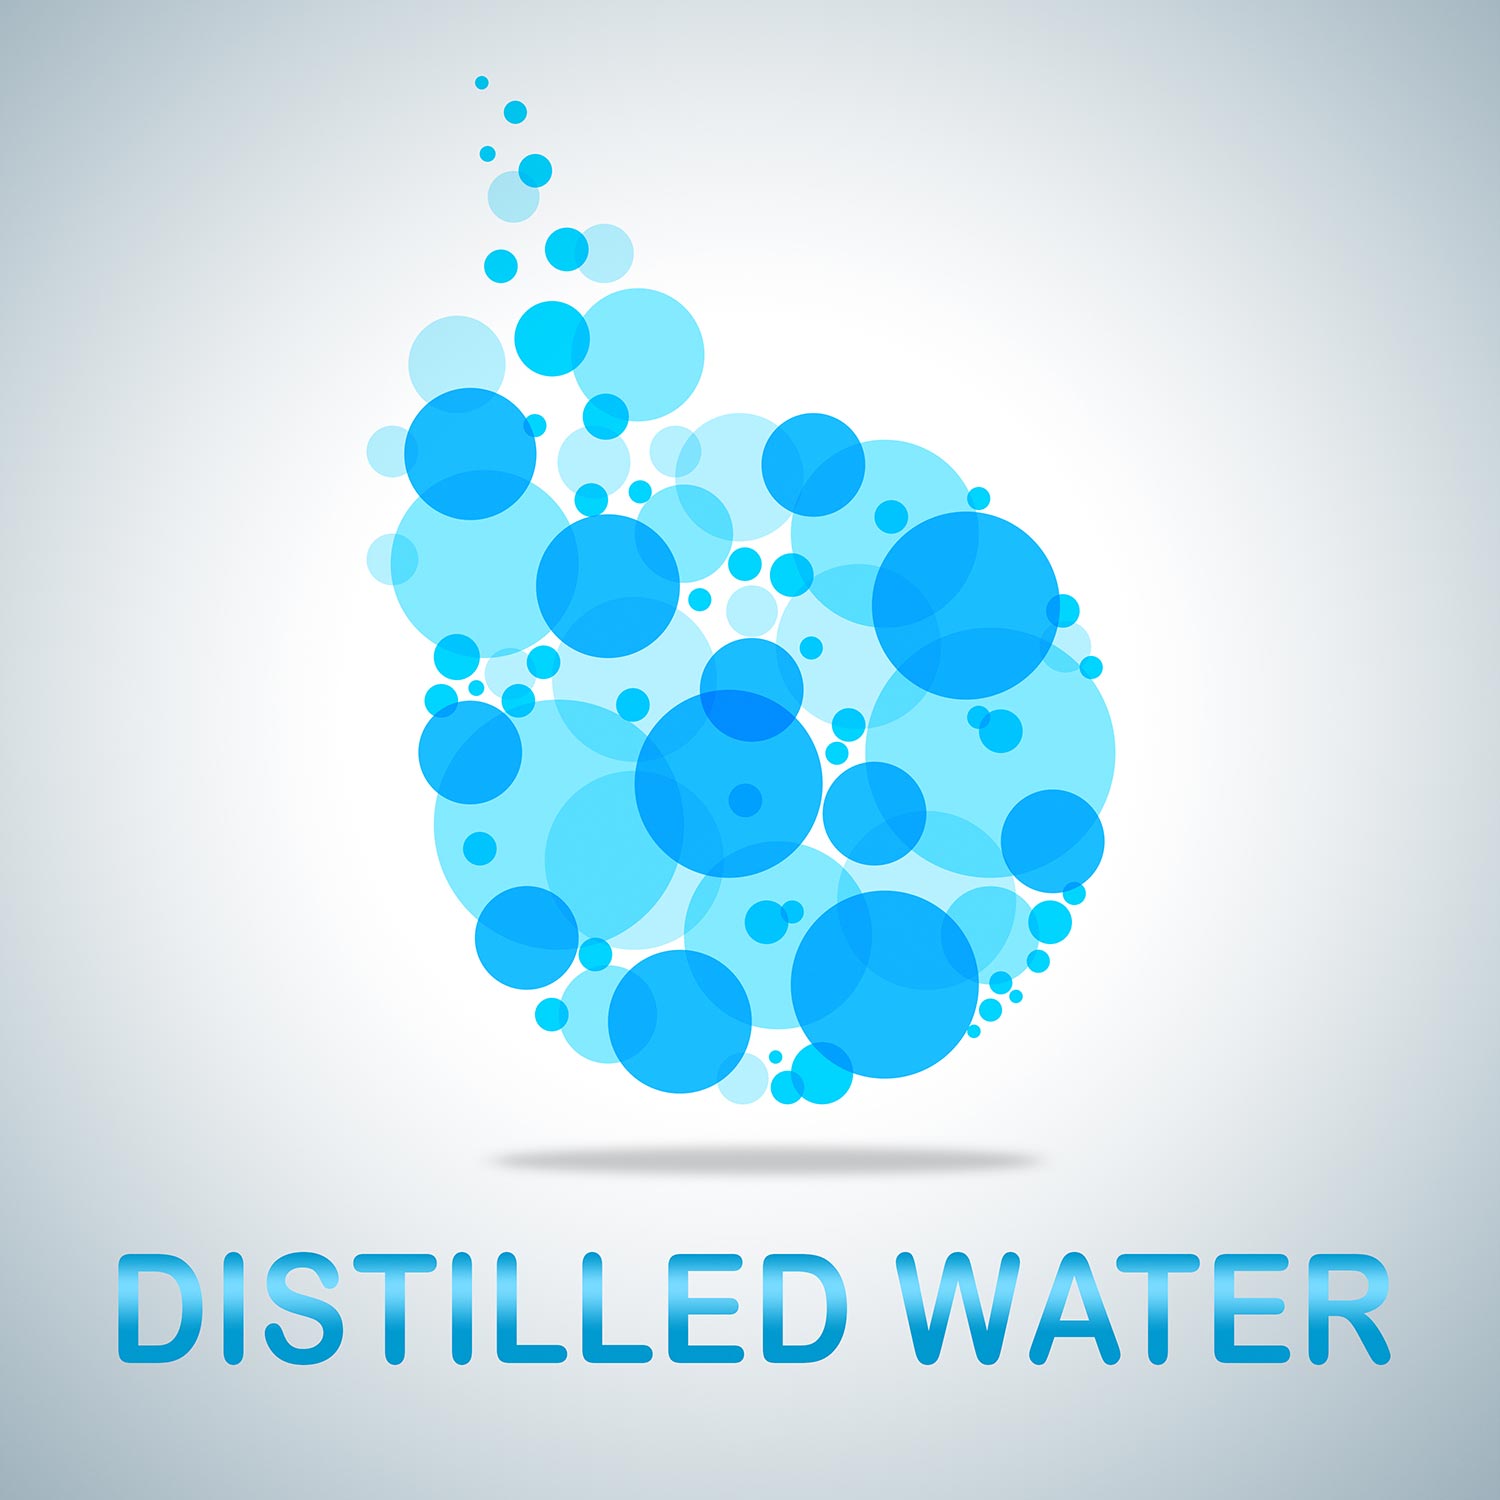 Distilled water showing purification potable and clean